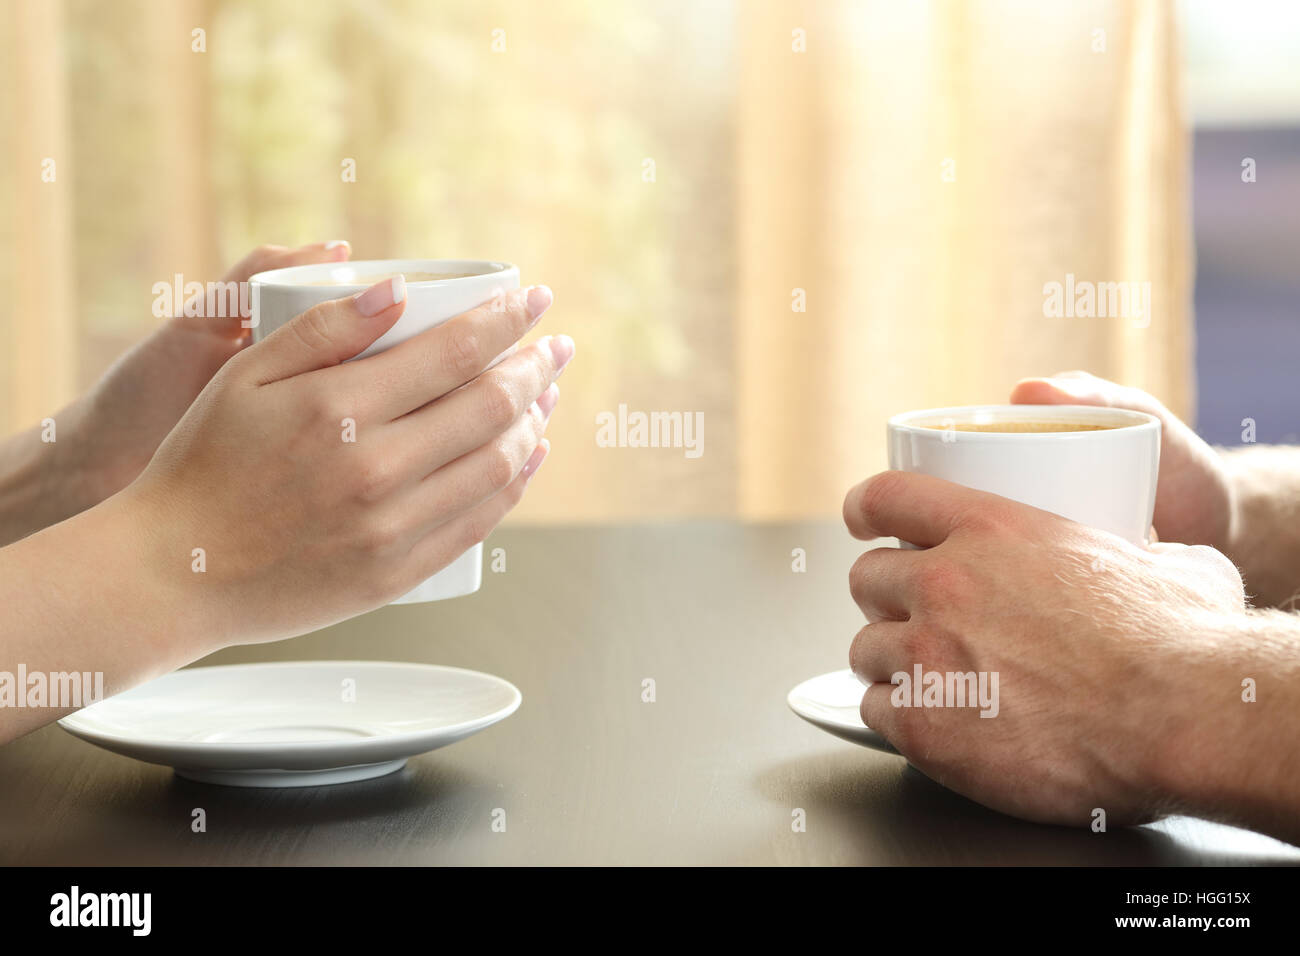 Close up of side view of a couple or friends talking with hands holding coffee cups on a table with a window and curtain in the background Stock Photo